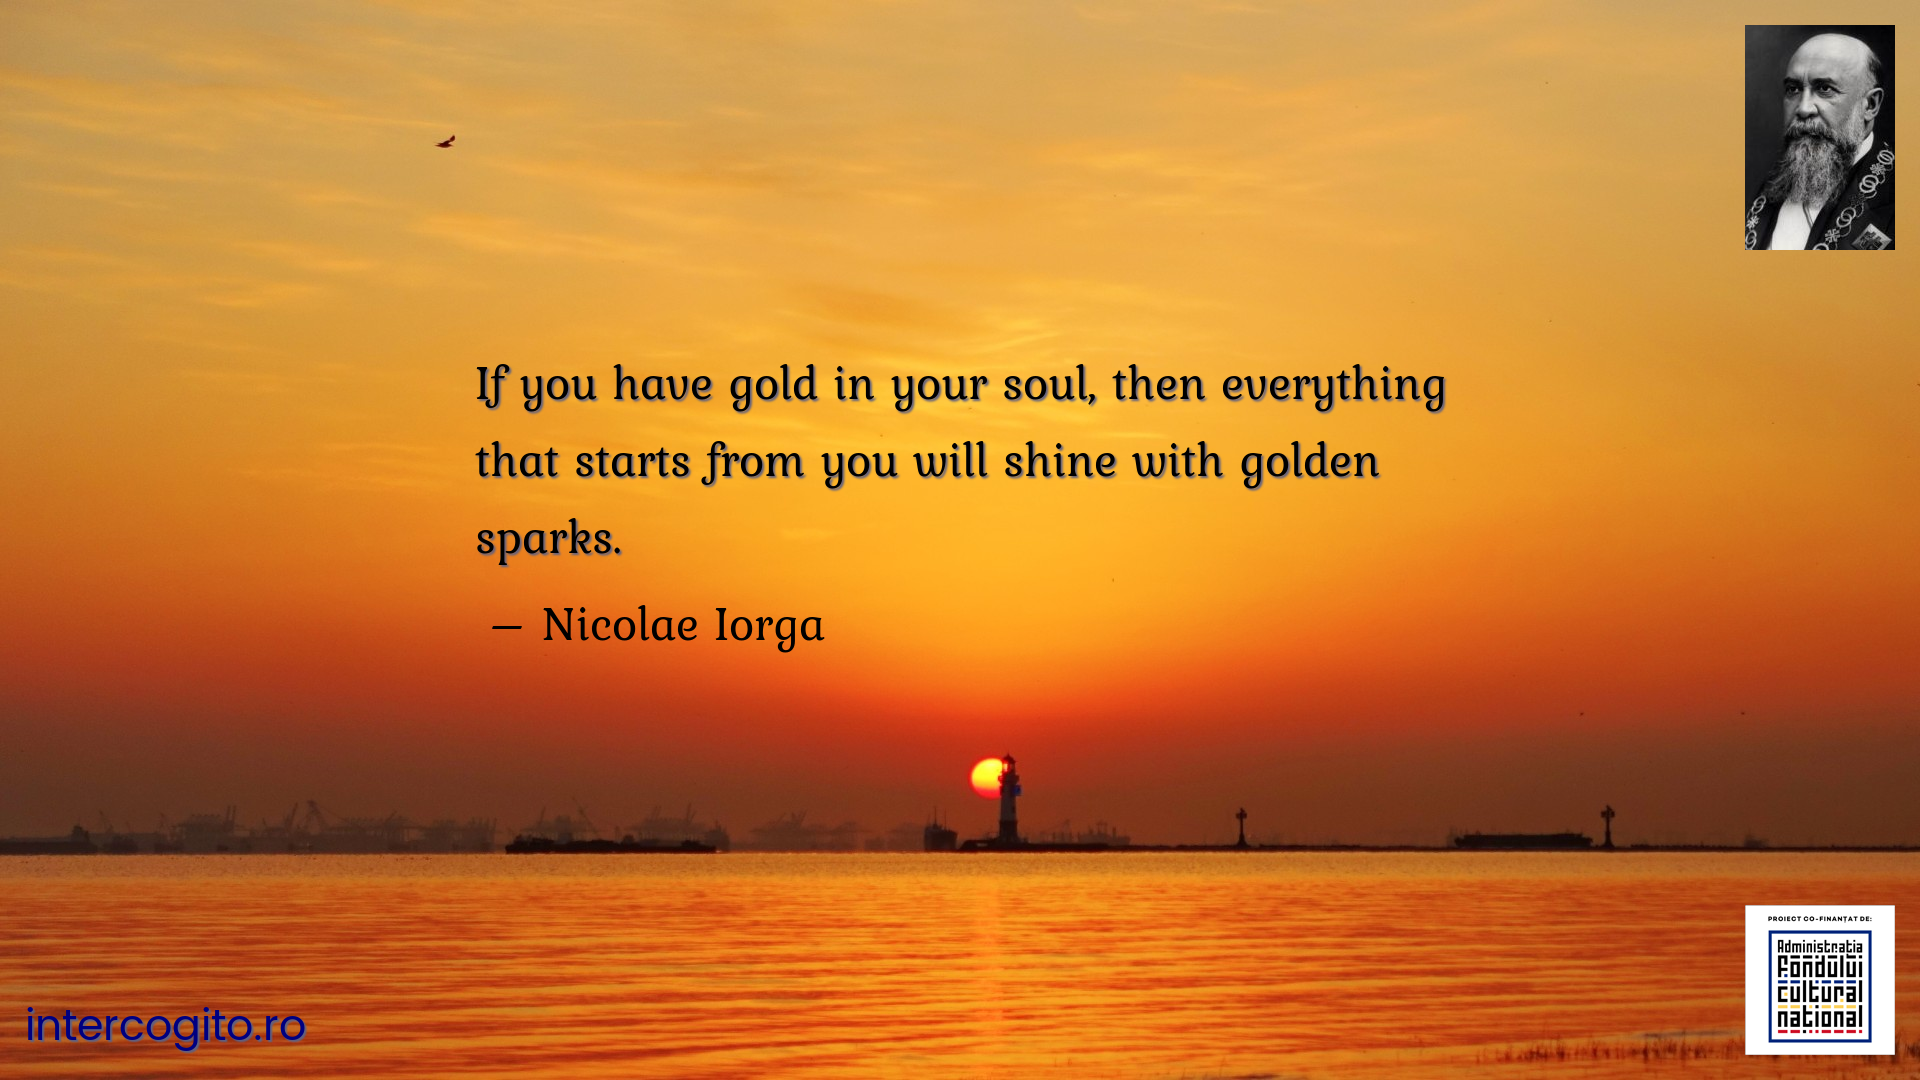 If you have gold in your soul, then everything that starts from you will shine with golden sparks.